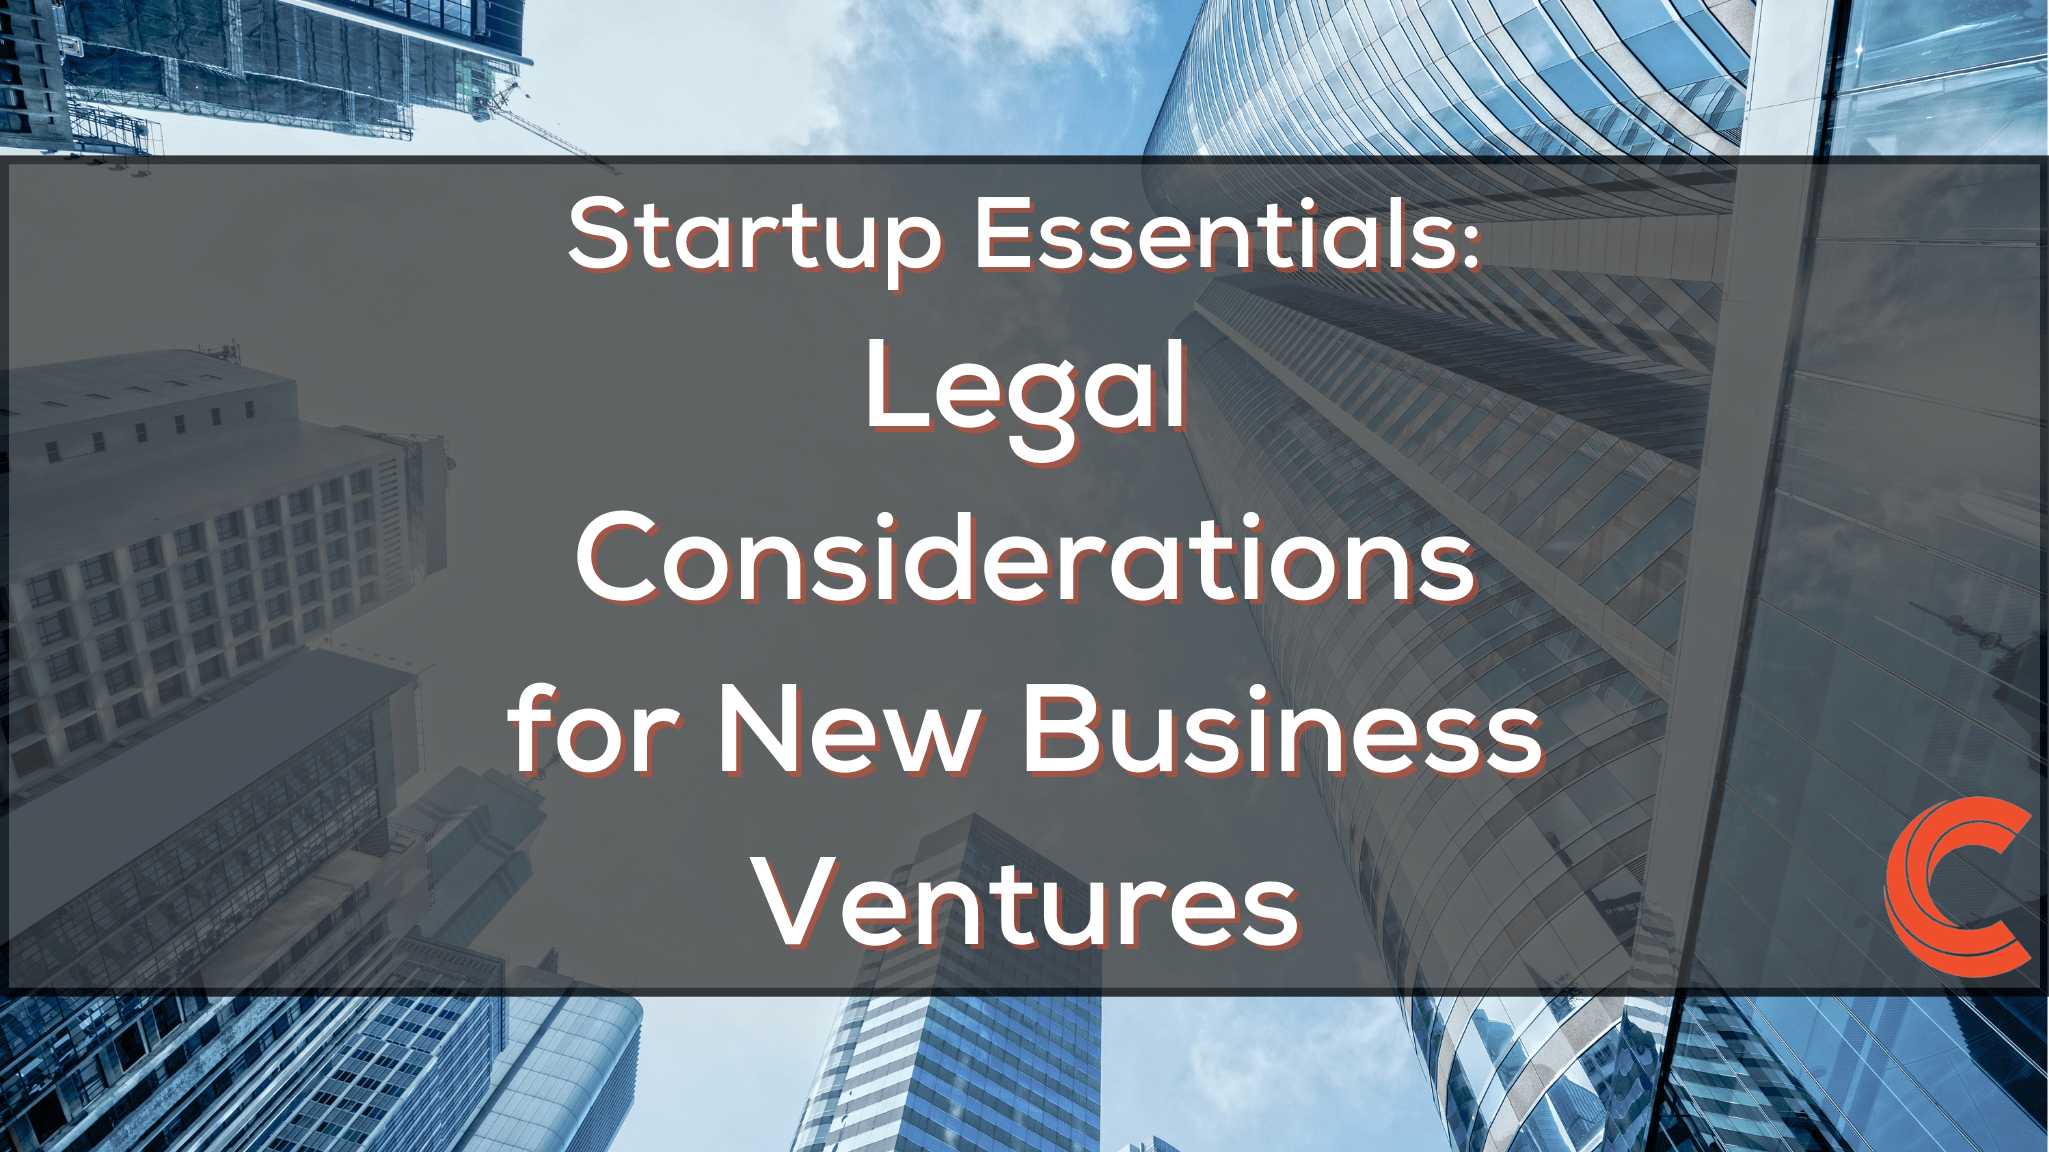 Legal Considerations for New Business Ventures